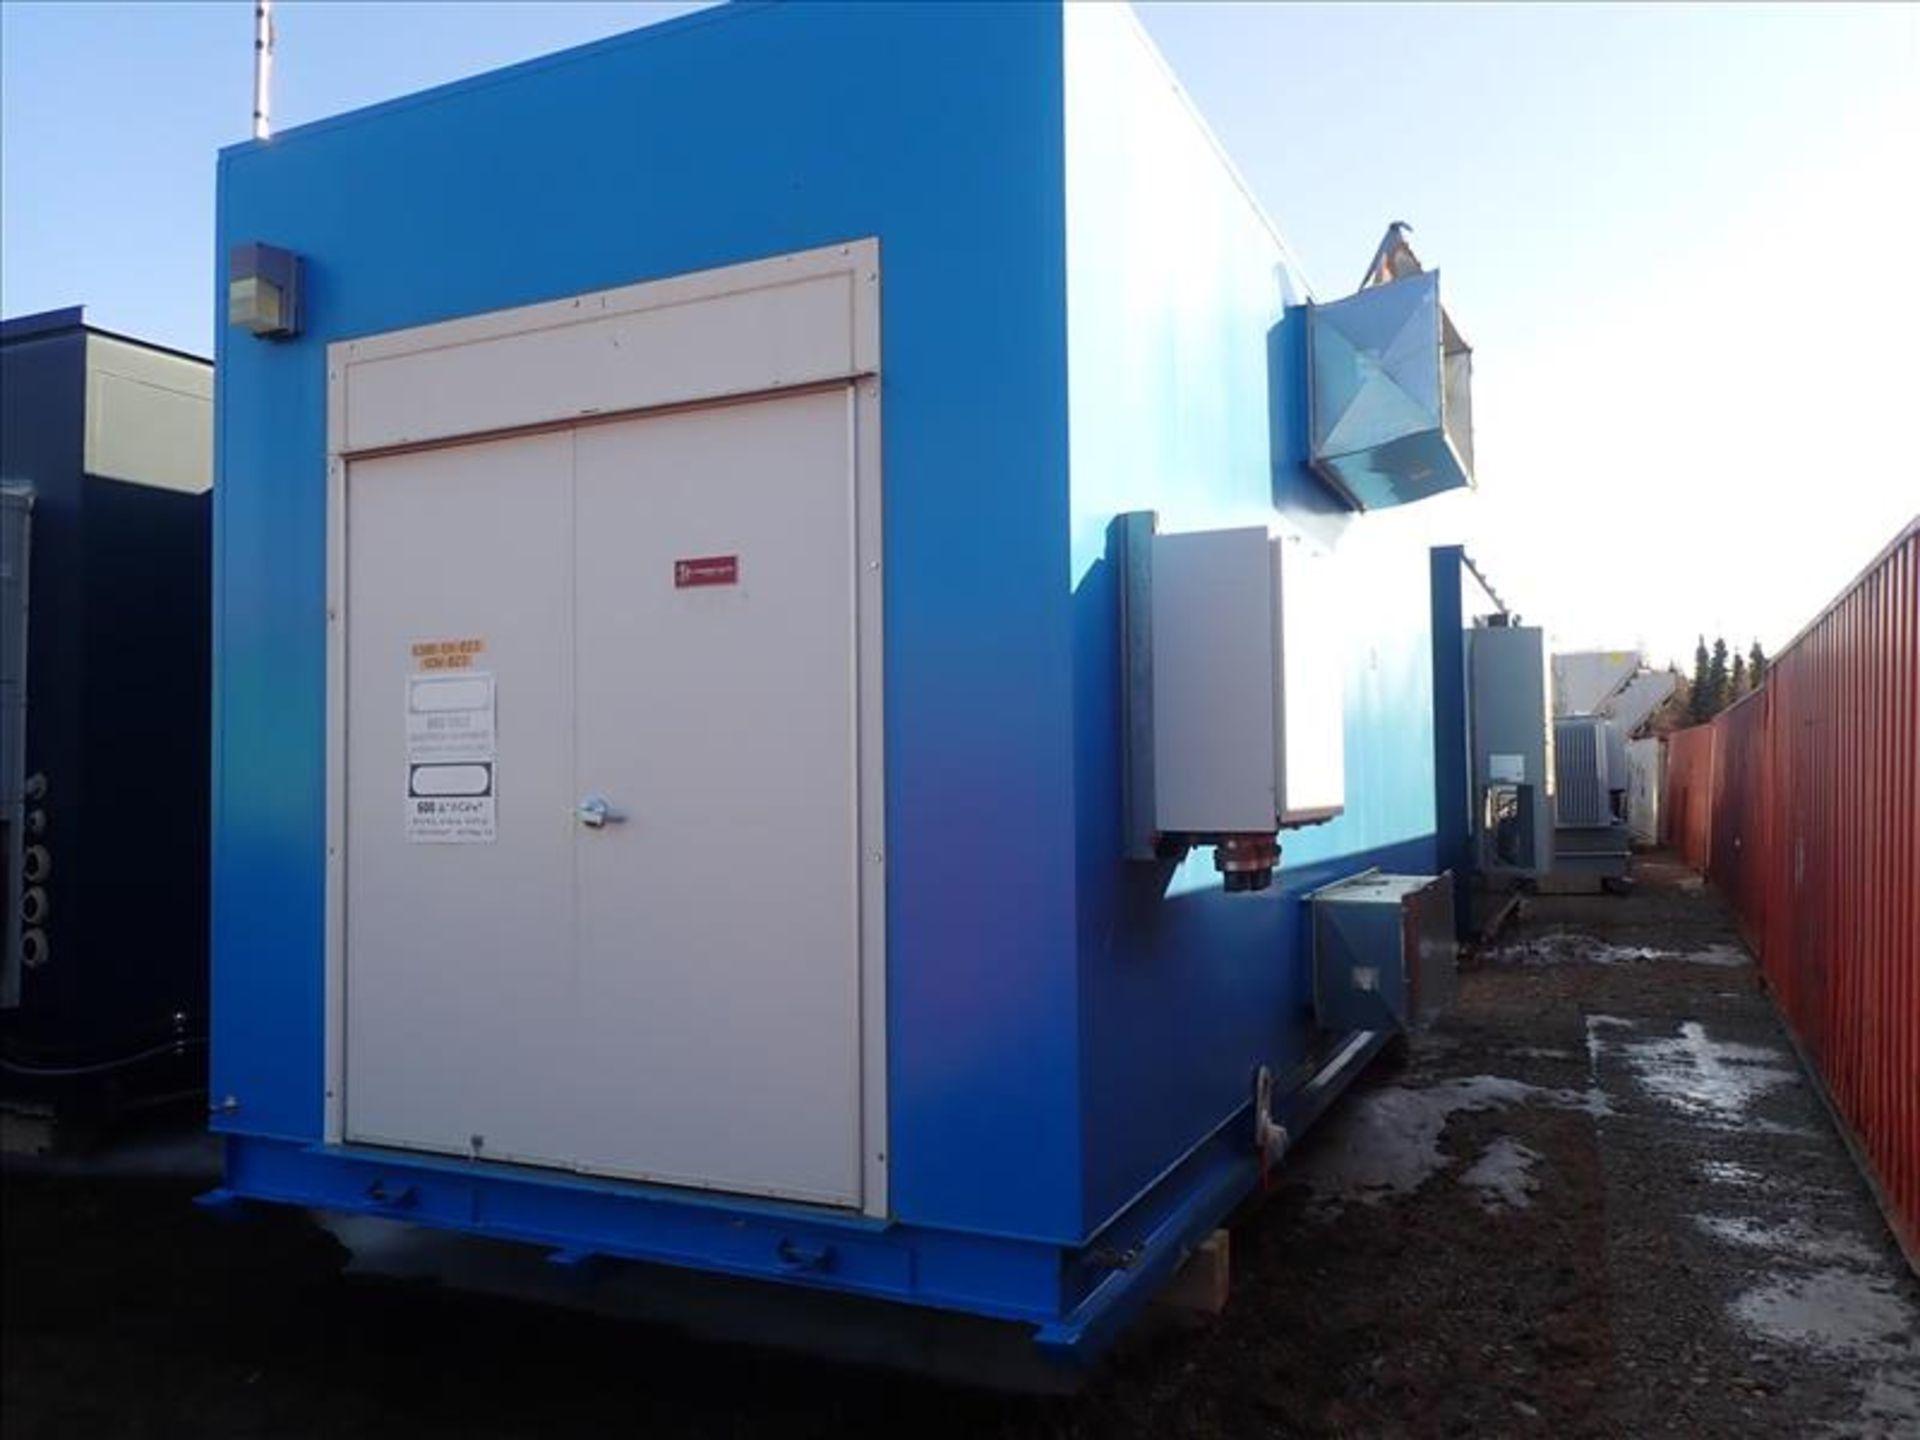 Electric-House (VDW23), 20 ft. x 9 ft, skid-mounted, lighting and sprinkler system, incl: ABB